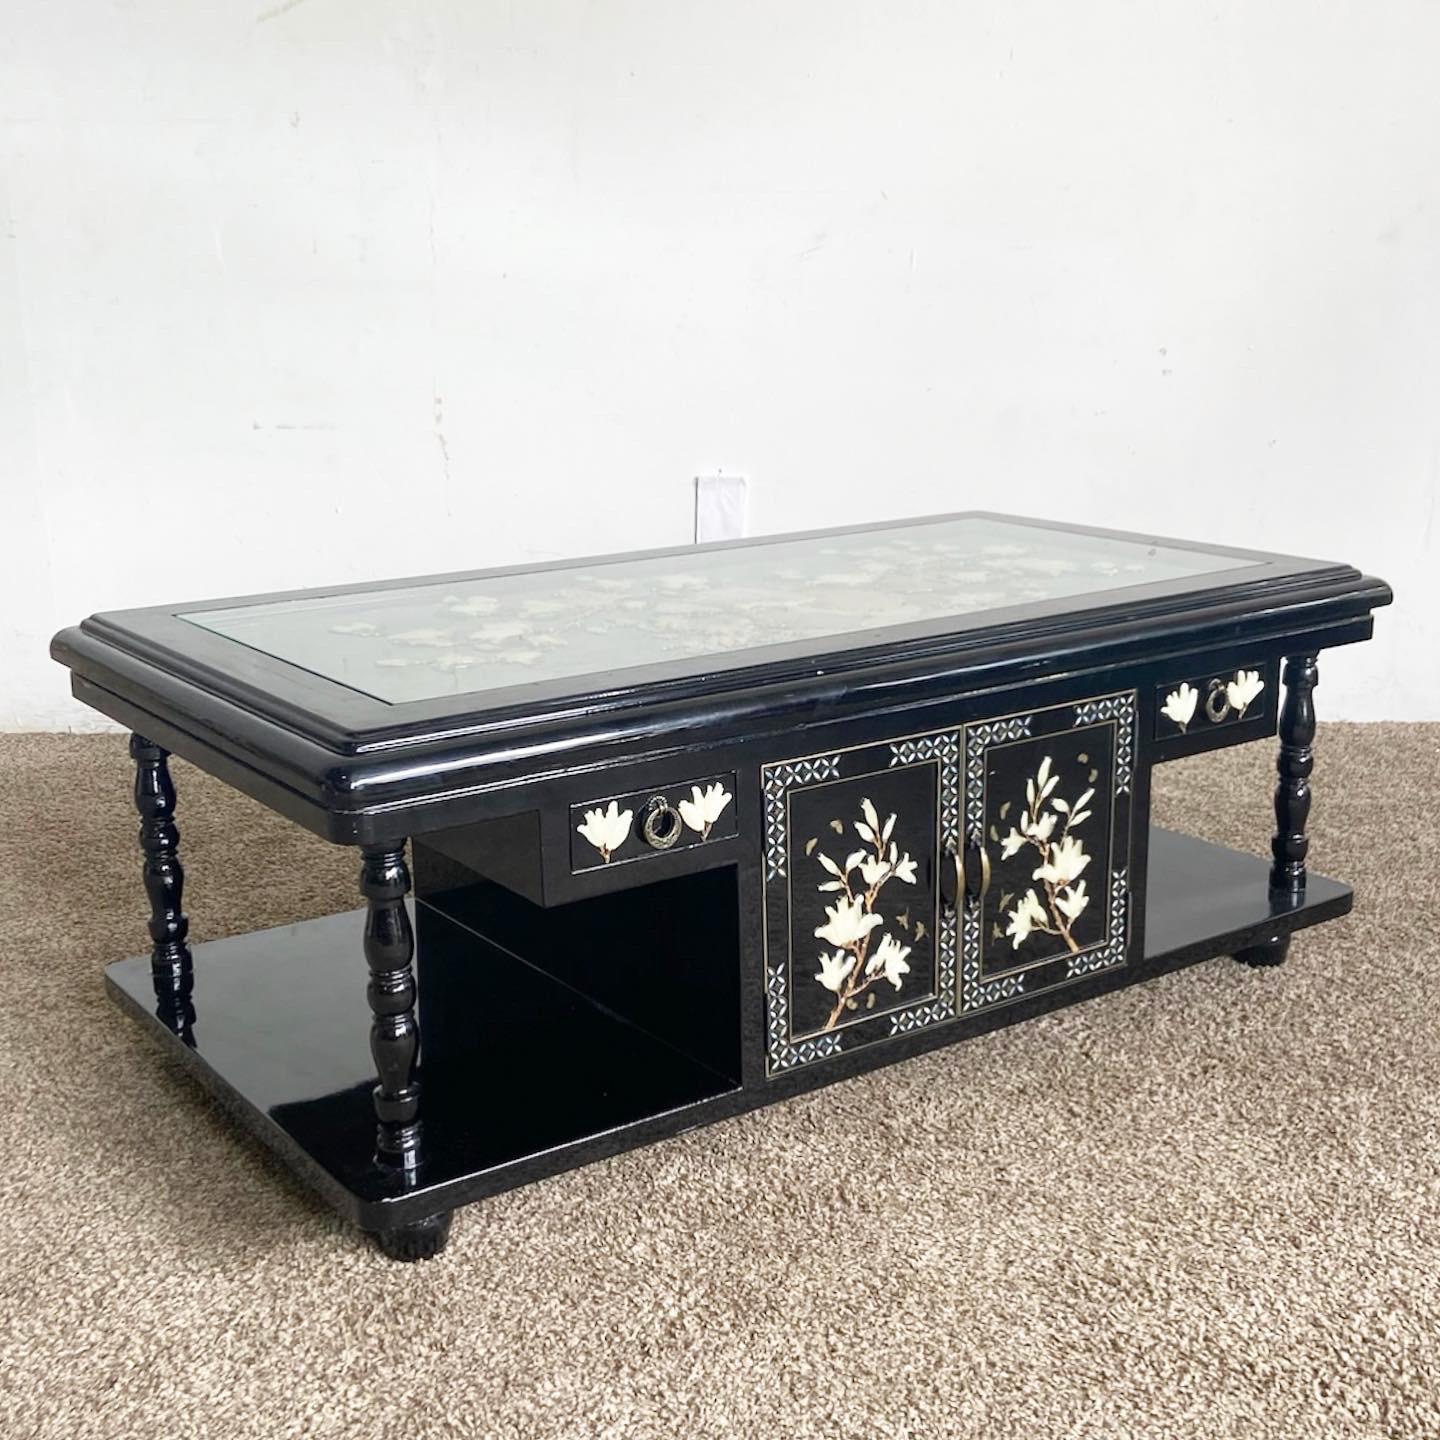 Embrace classic aesthetics with our Chinese Black Lacquer Coffee Table, highlighted by intricate Asian motifs and Mother of Pearl inlays. Featuring a protective inlaid glass top and cabinet doors, this table is a perfect blend of functionality and